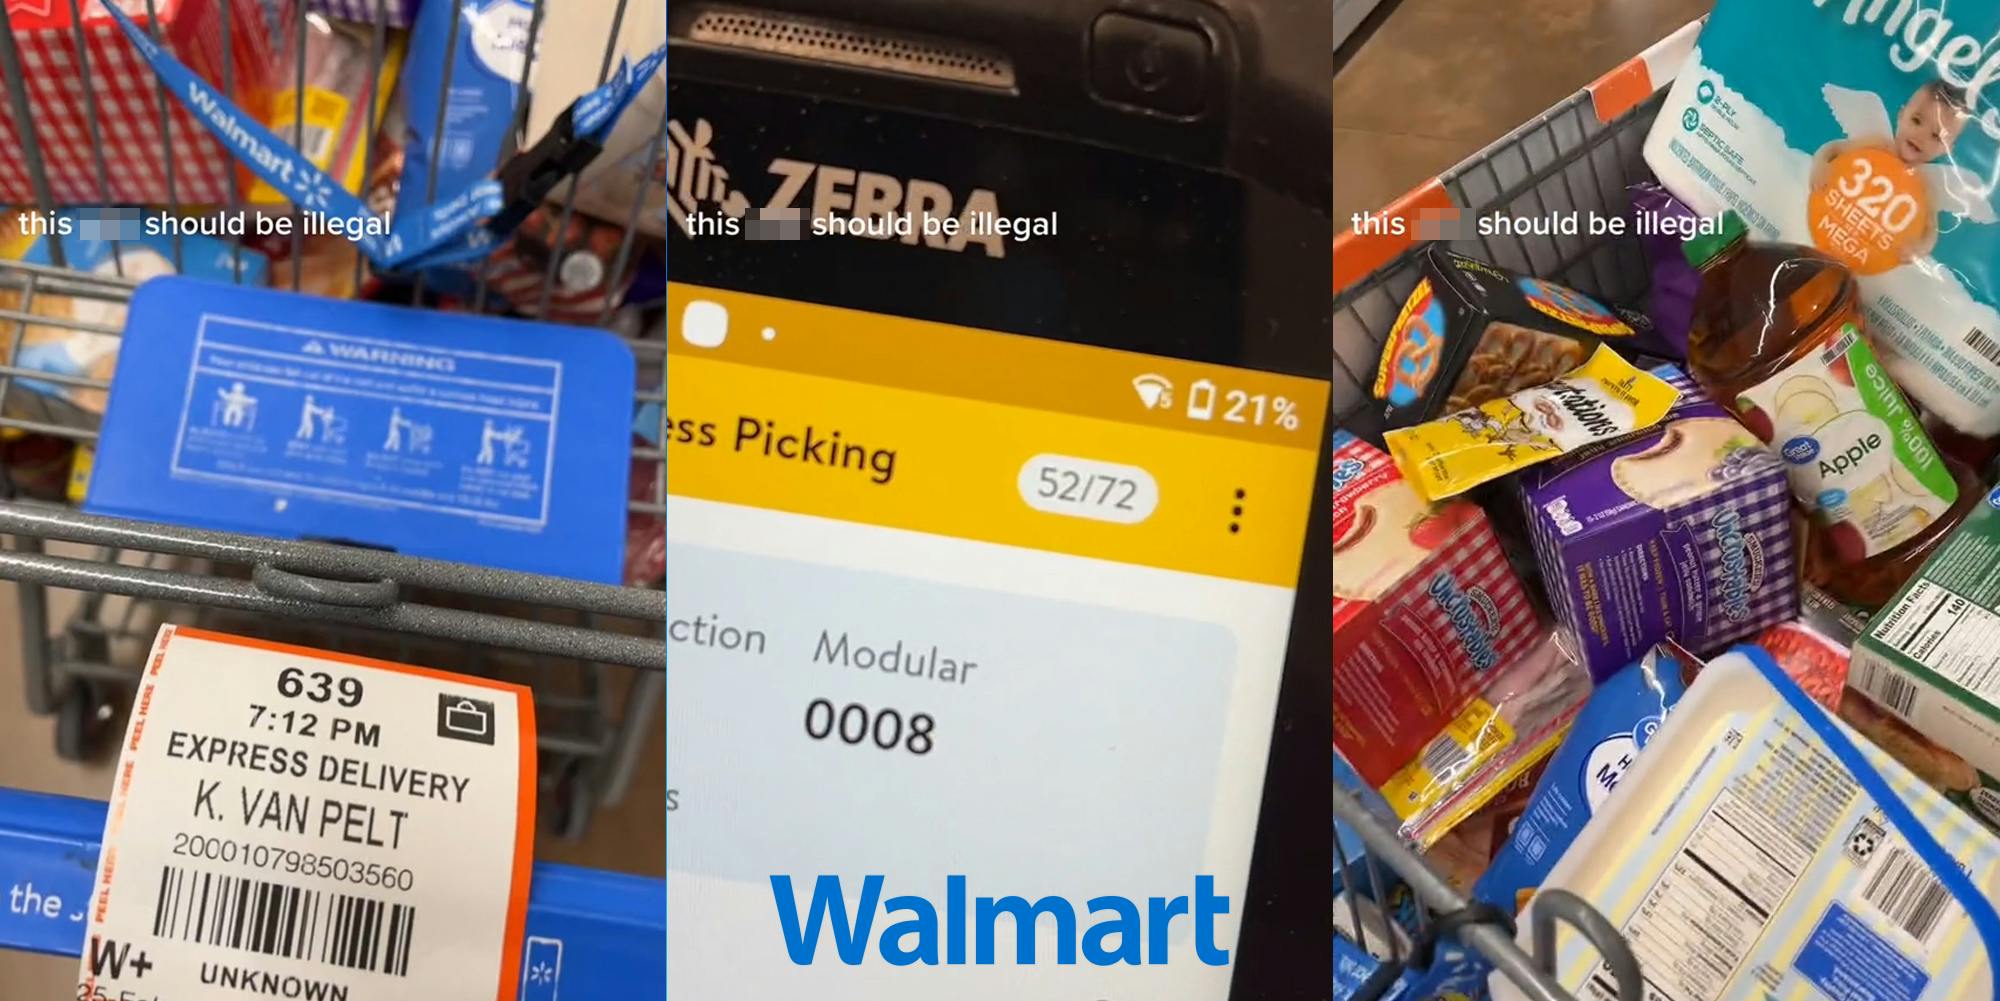 Walmart cart full of groceries with tag on handle "EXPRESS DELIVERY" with caption "this blank should be illegal" (l) Zebra scanner displaying 52/72 items with caption "this blank should be illegal" with Walmart logo at bottom (c) Walmart cart full of groceries with caption "this blank should be illegal" (r)